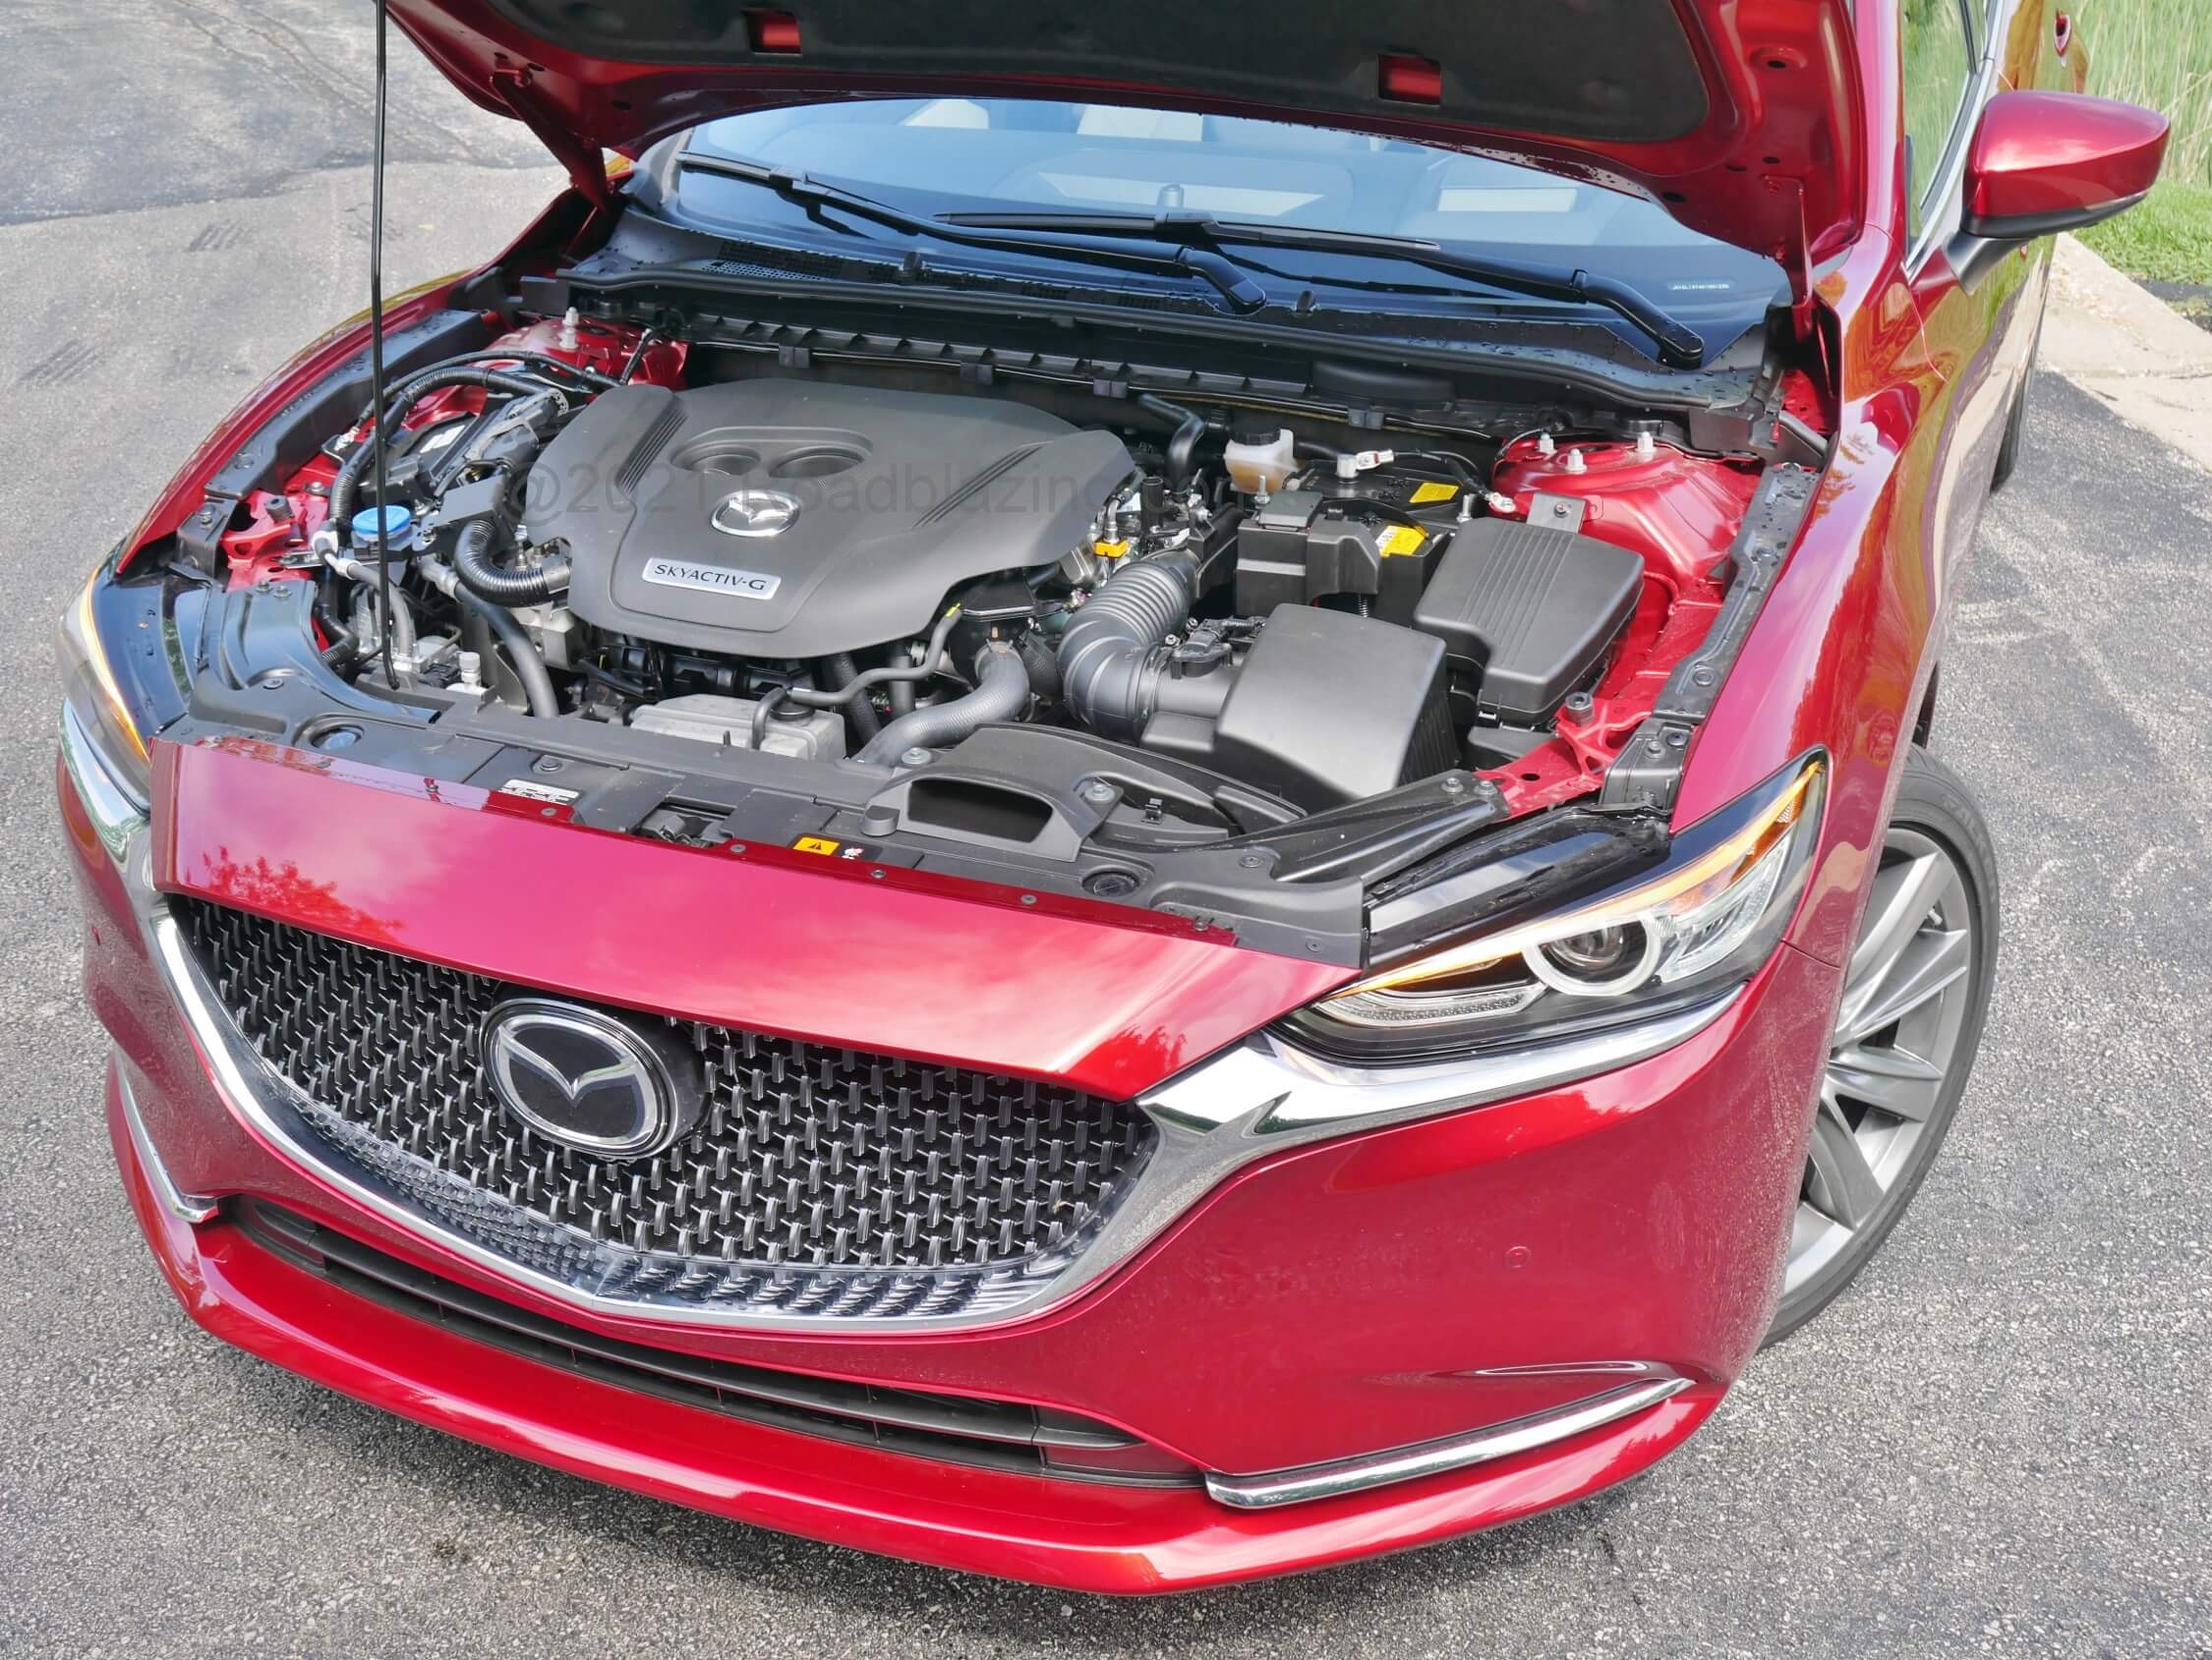 2021 Mazda 6 Signature 2.5T: turbocharged twin-cam 2.5L engine churns out 250 hp / 320 lb-ft torque on super unleaded, still returning 26 combined MPG